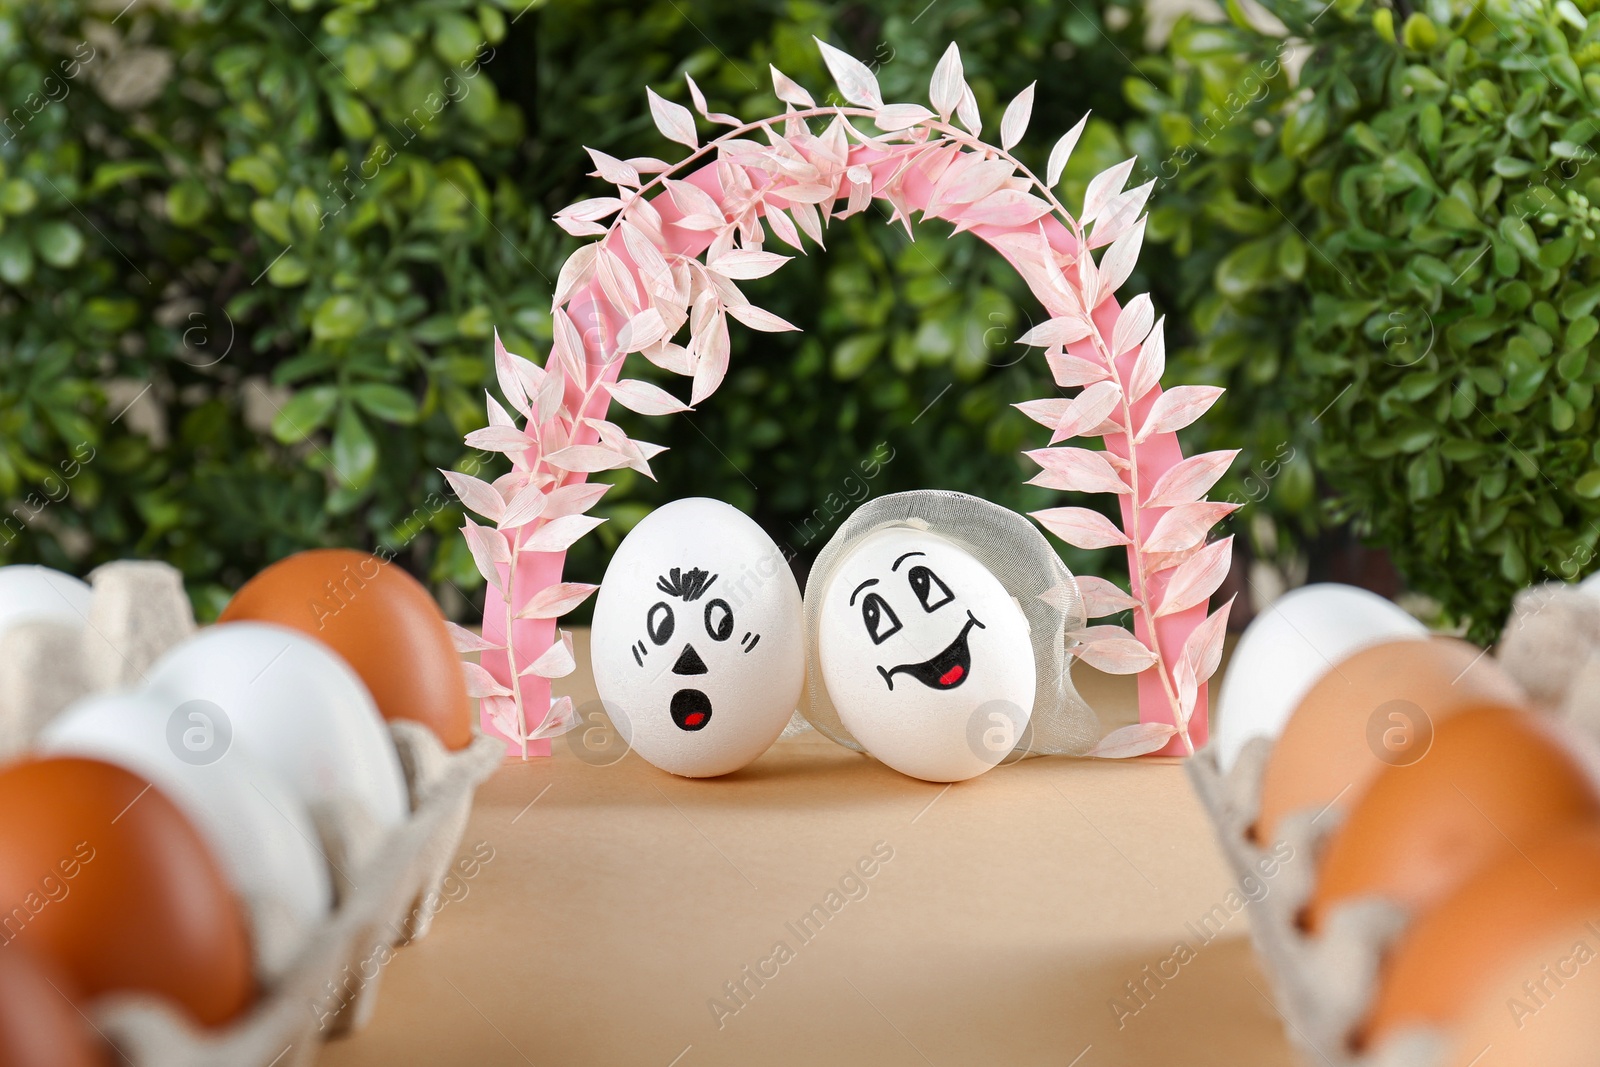 Photo of Eggs with drawn faces as bride and groom under decorative arch on table during wedding